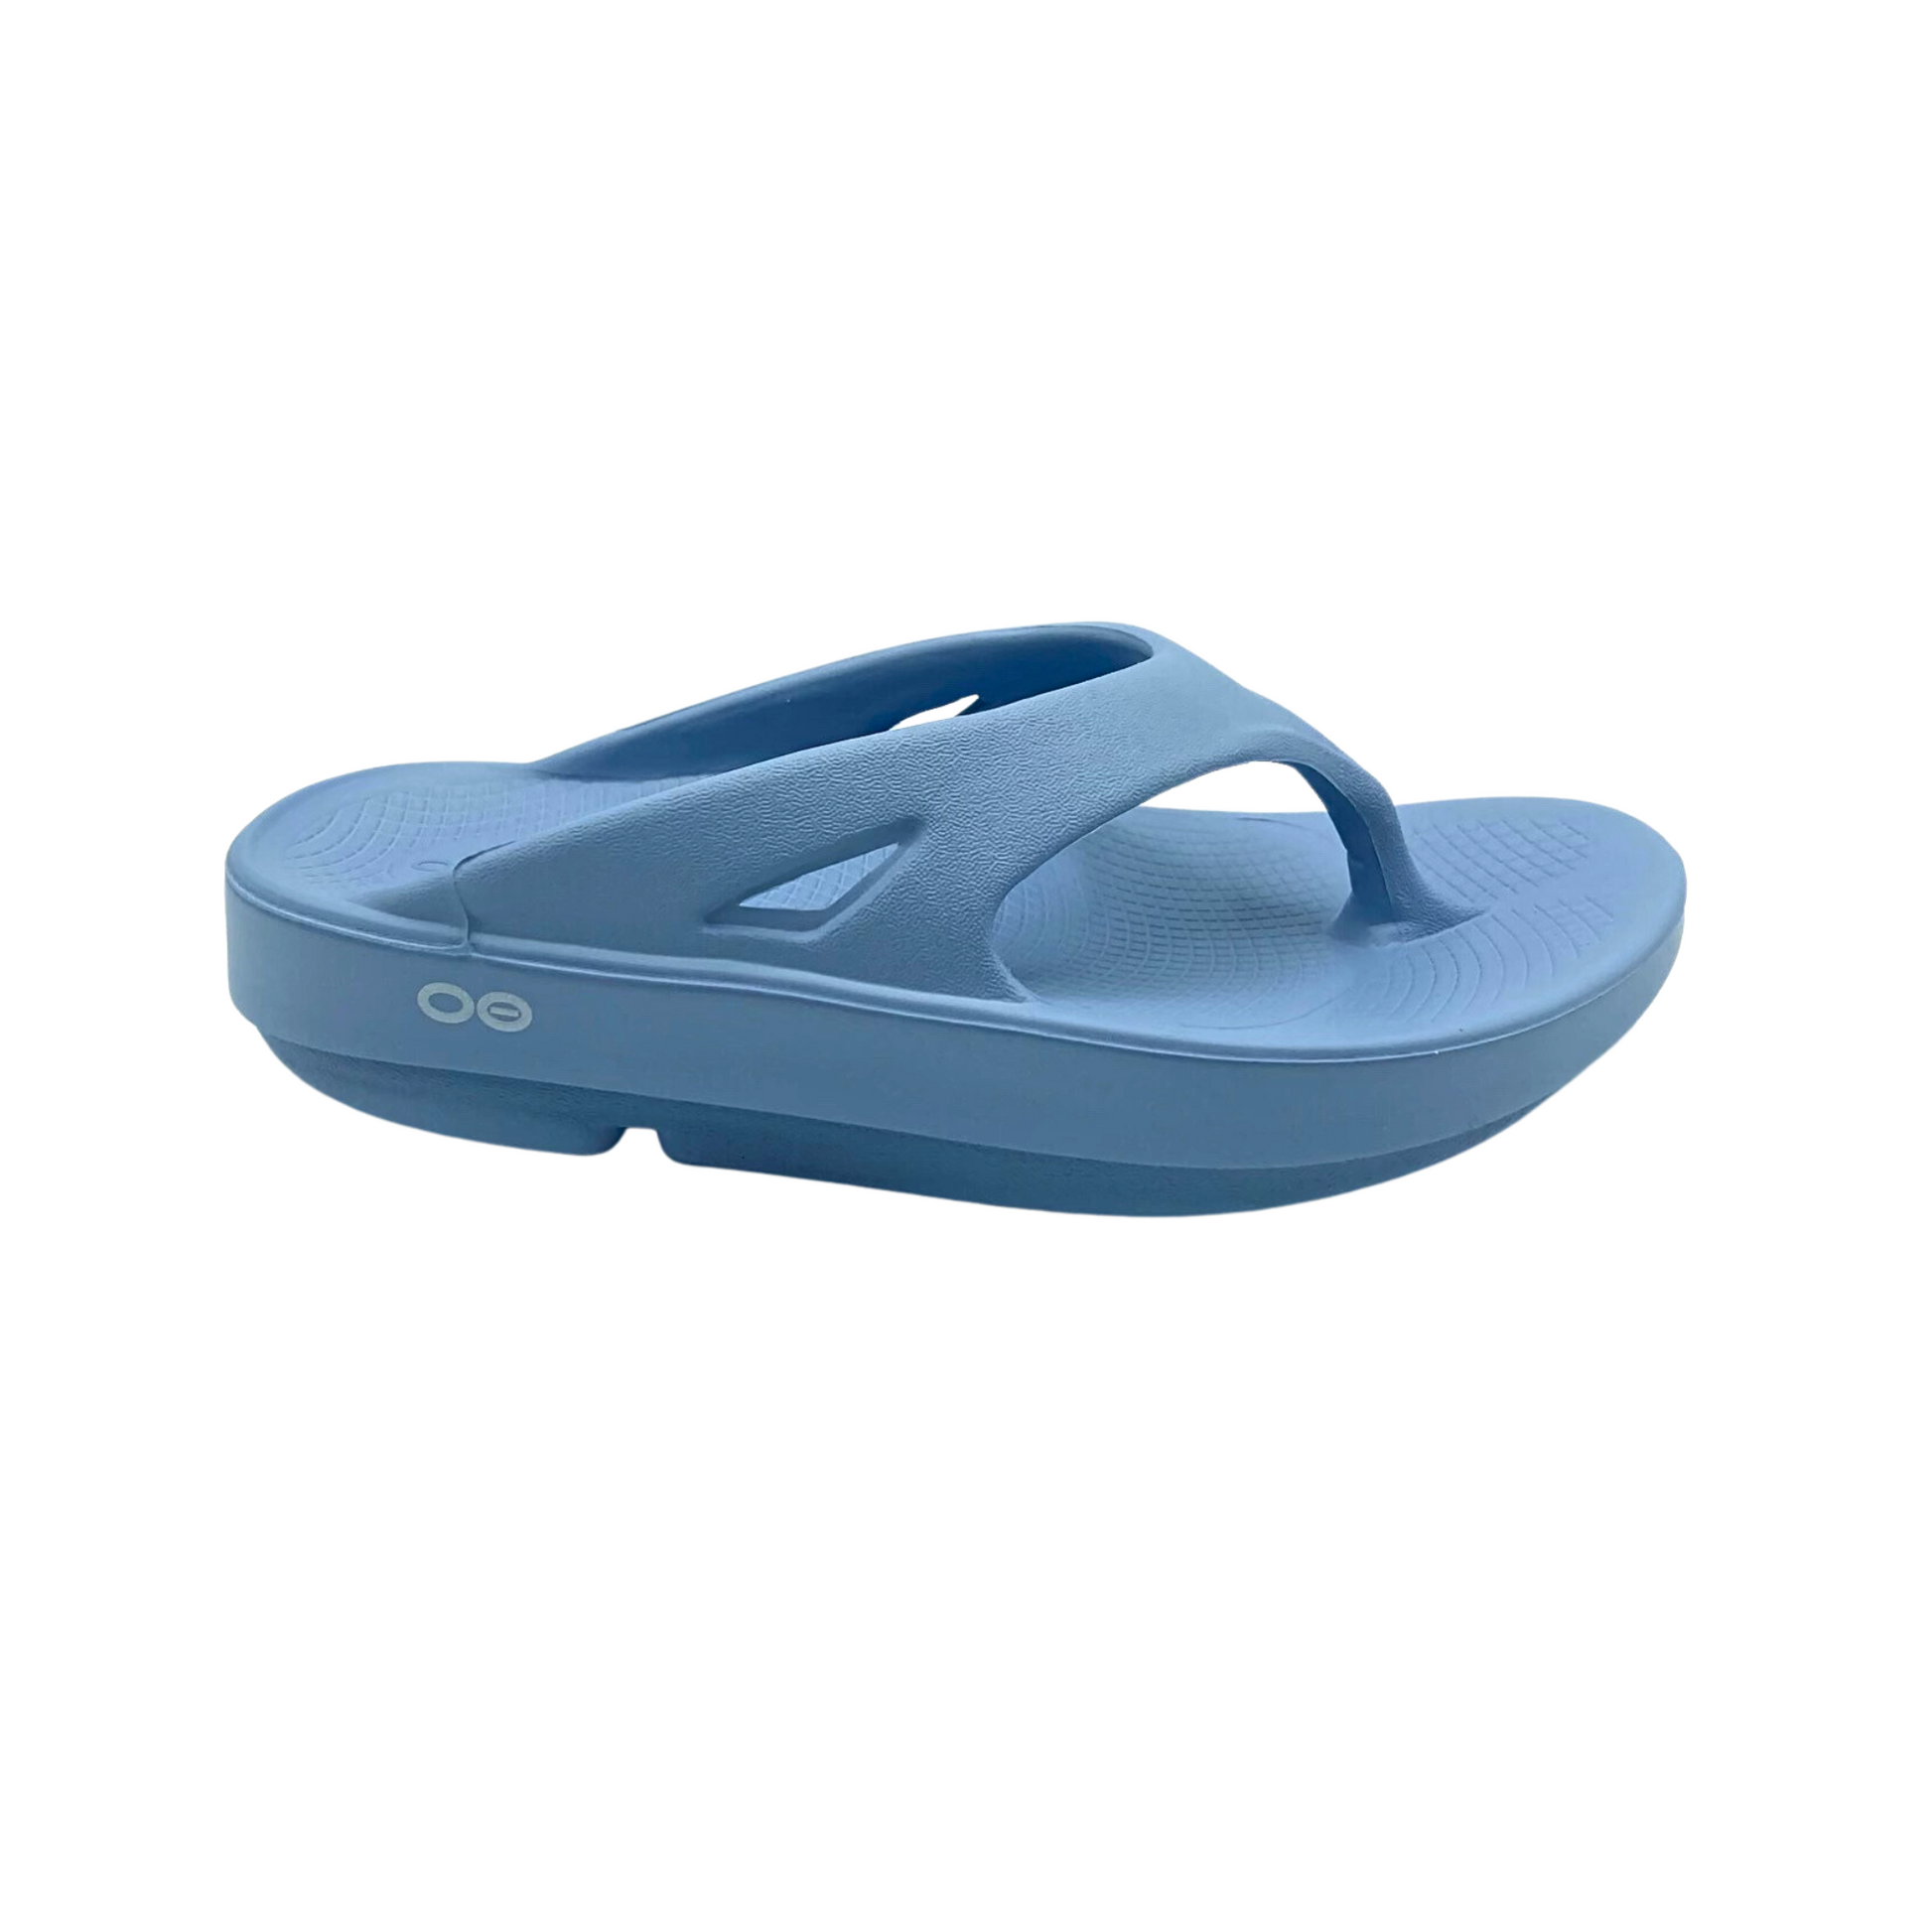 Outside view of right foam sandal with toe post.  